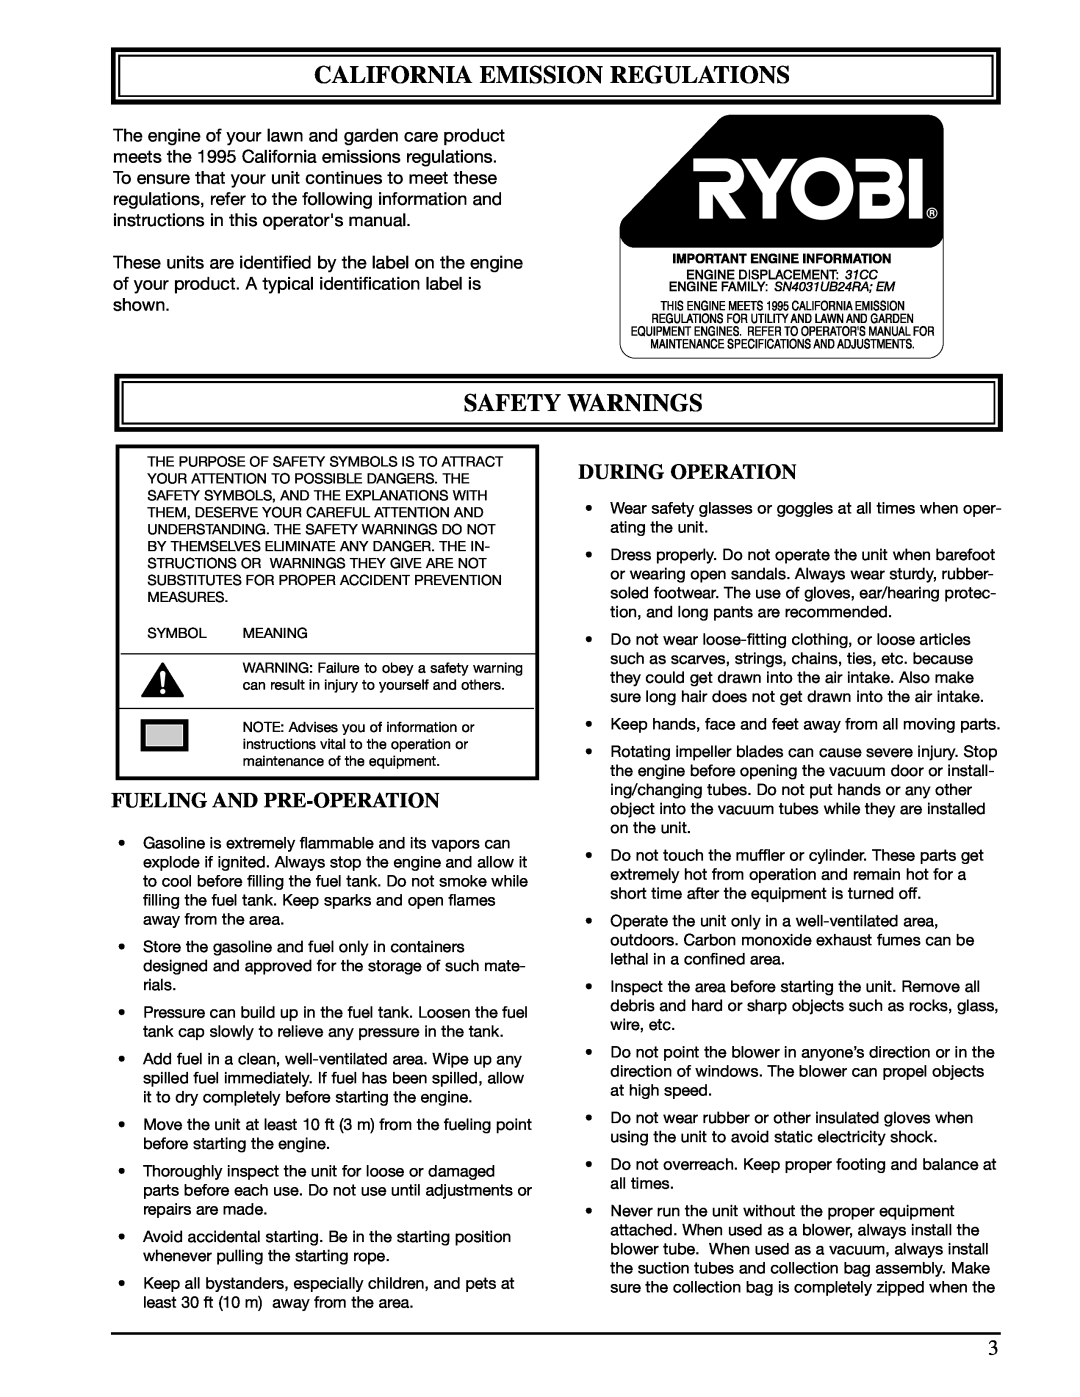 Ryobi 310r manual California Emission Regulations, Safety Warnings, Fueling And Pre-Operation, During Operation 